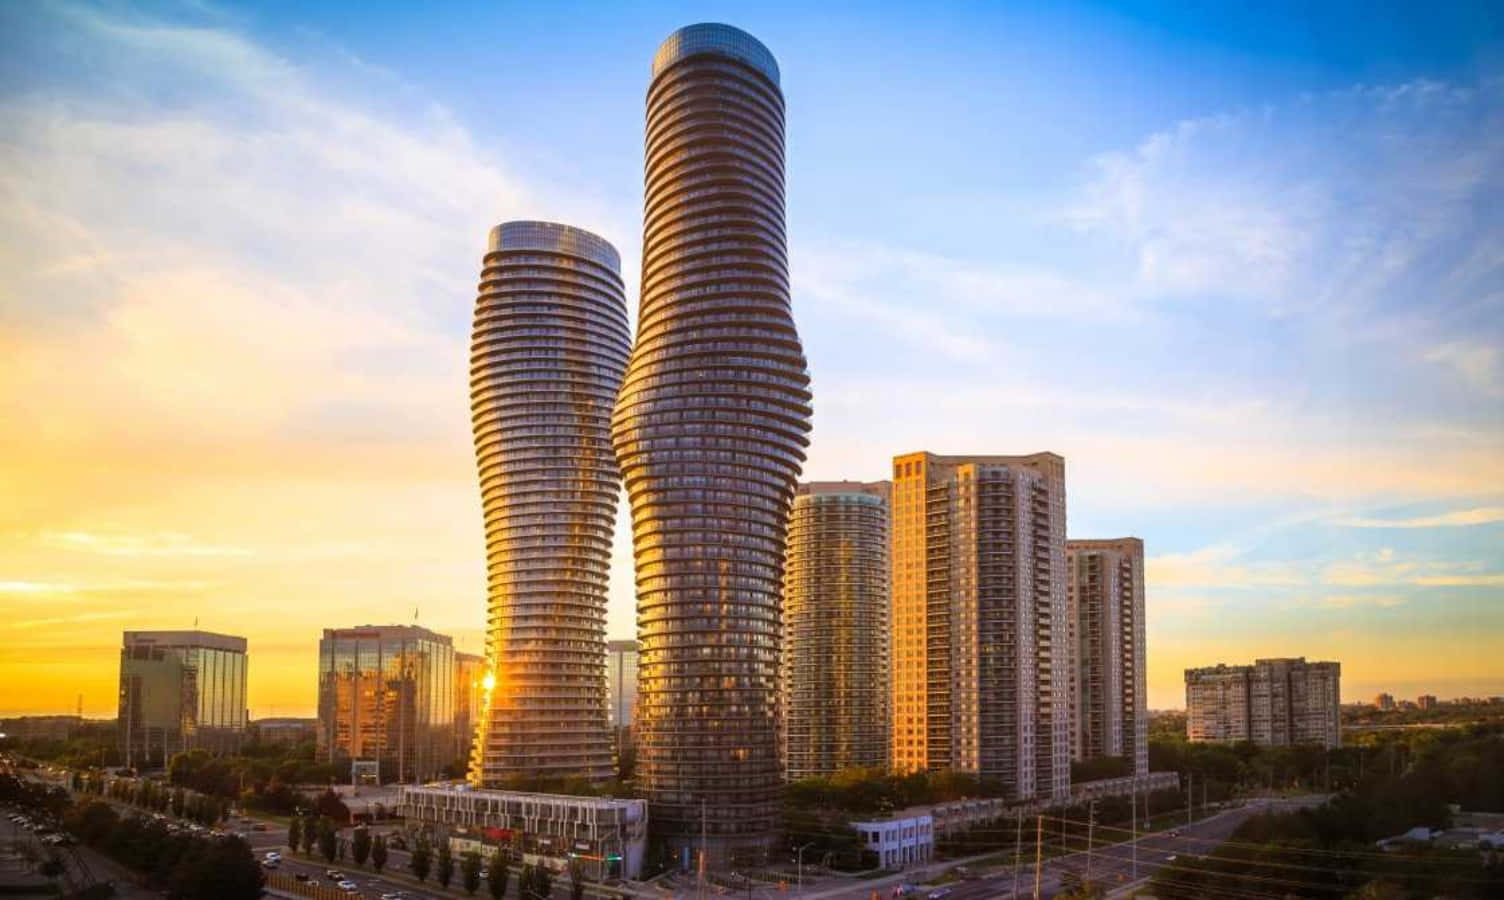 Mississauga Absolute Towers Sunset Wallpaper